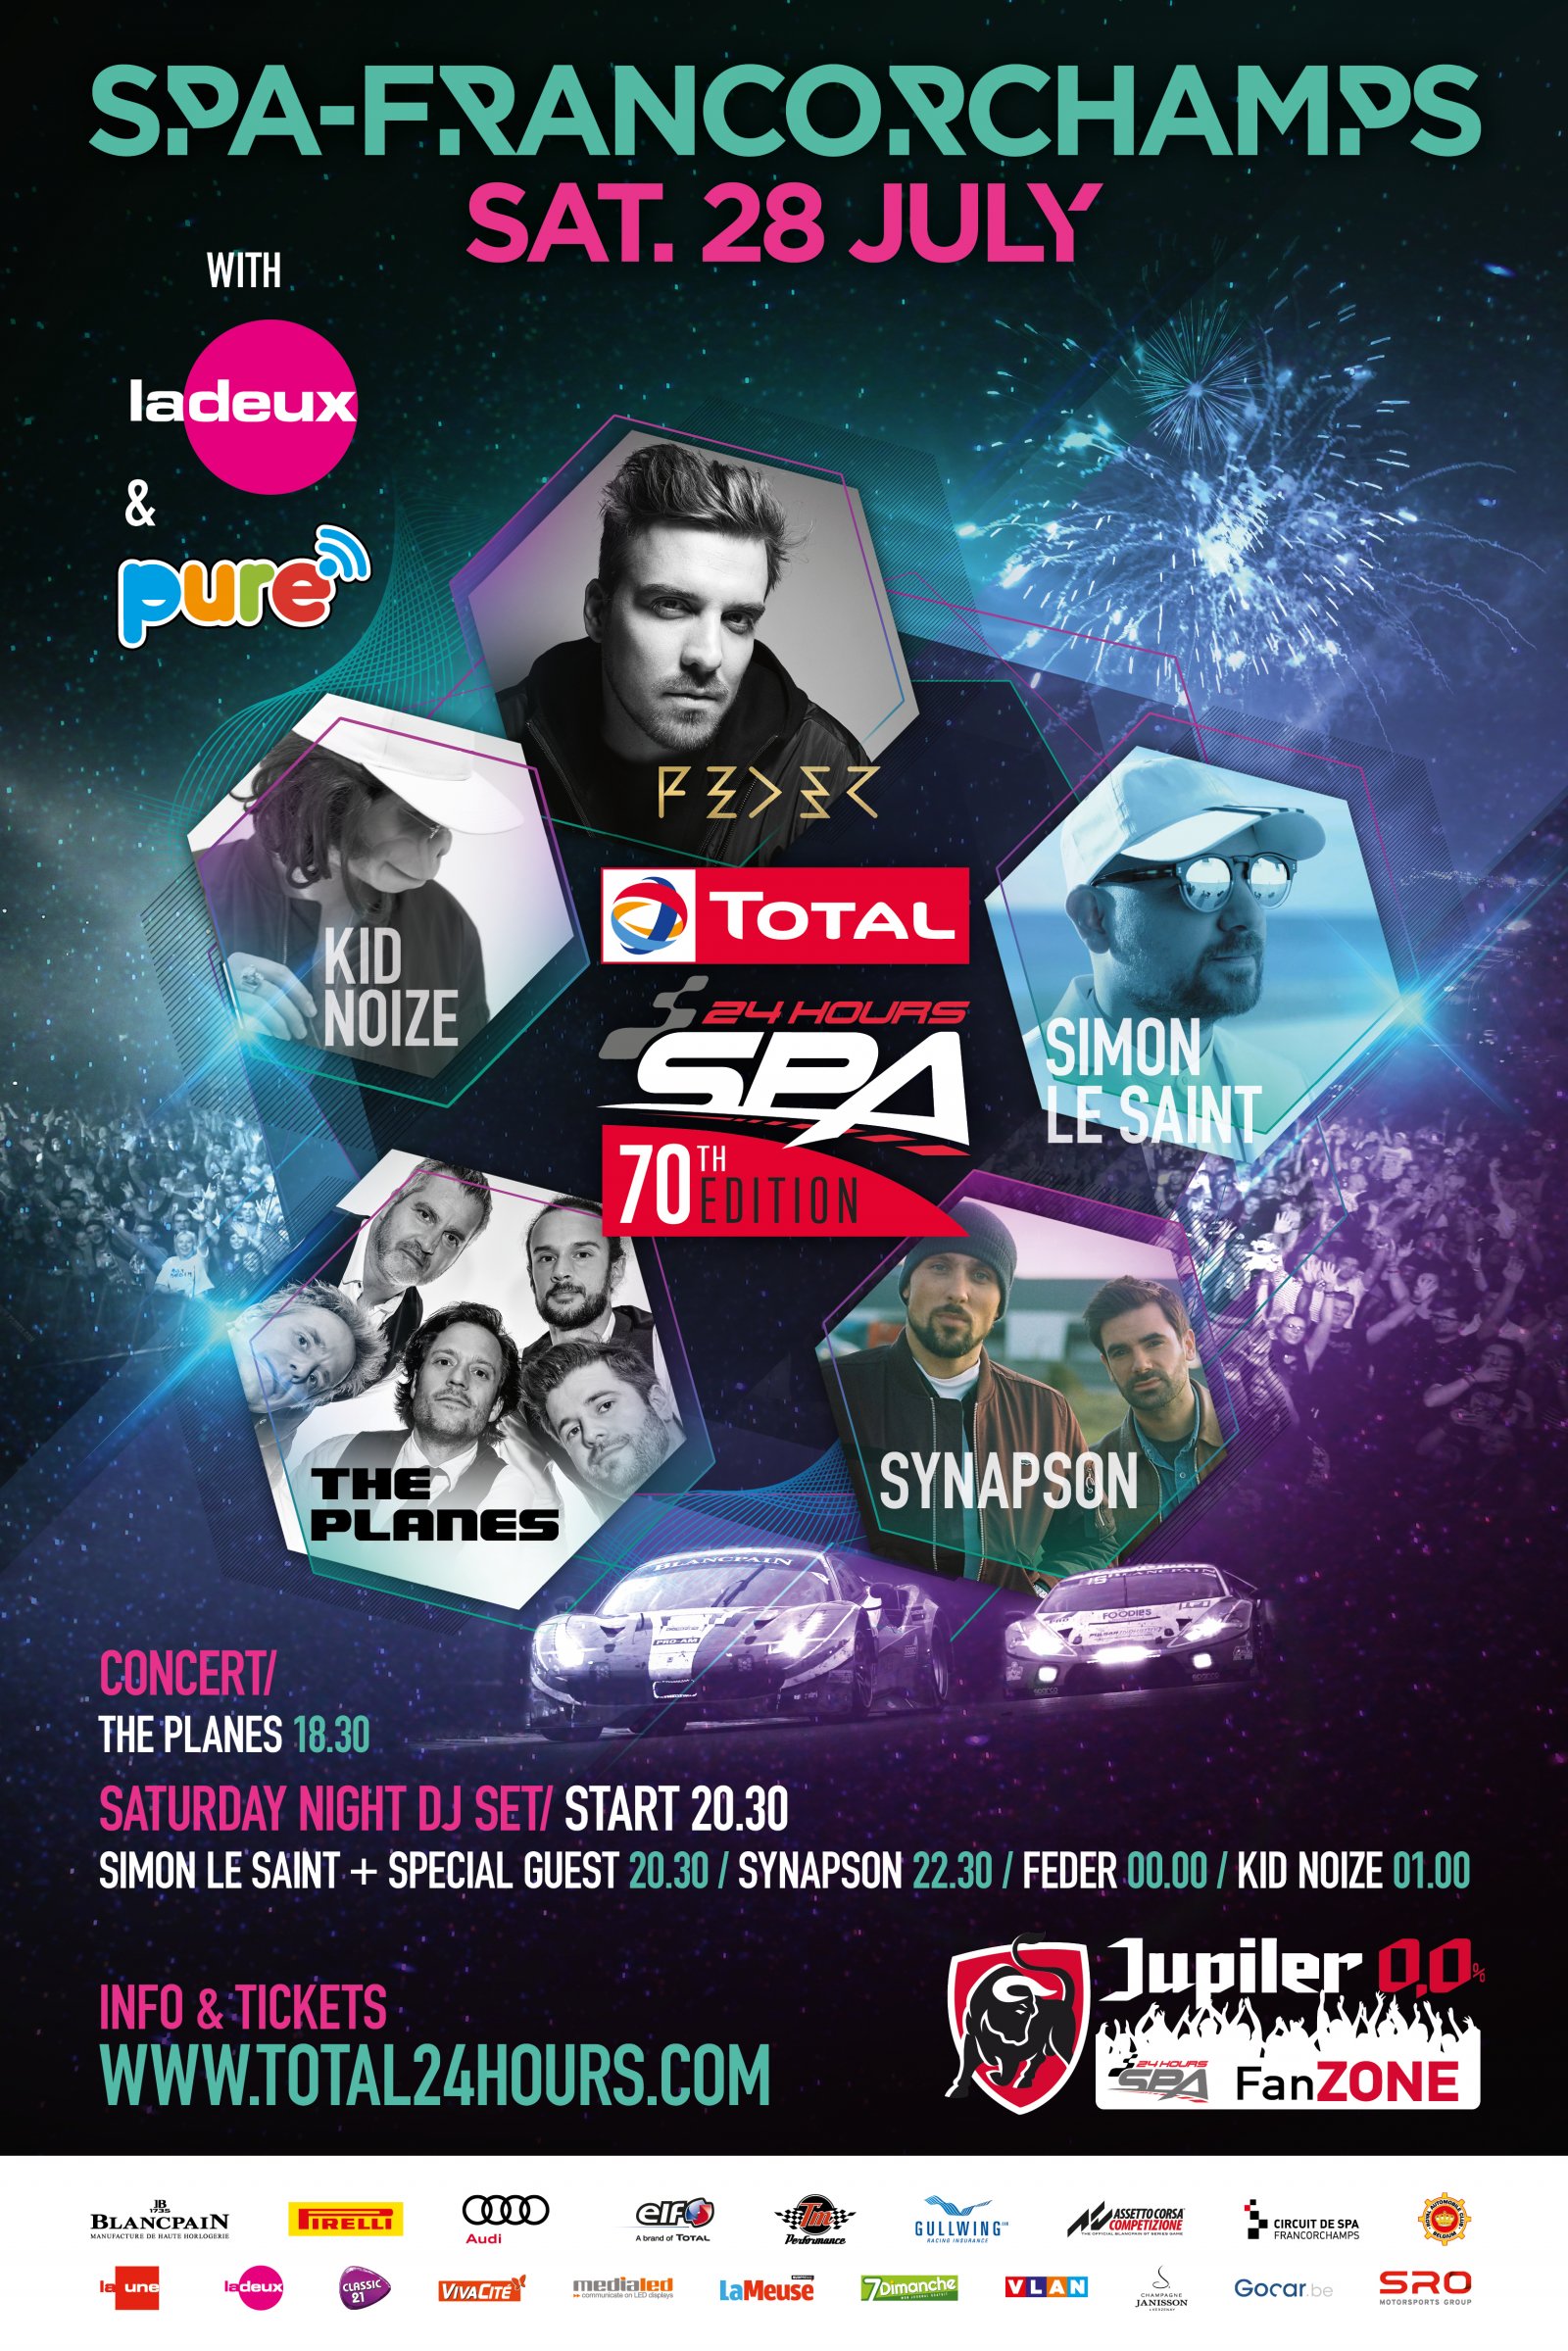 Exciting music line-up confirmed for Total 24 hours of Spa